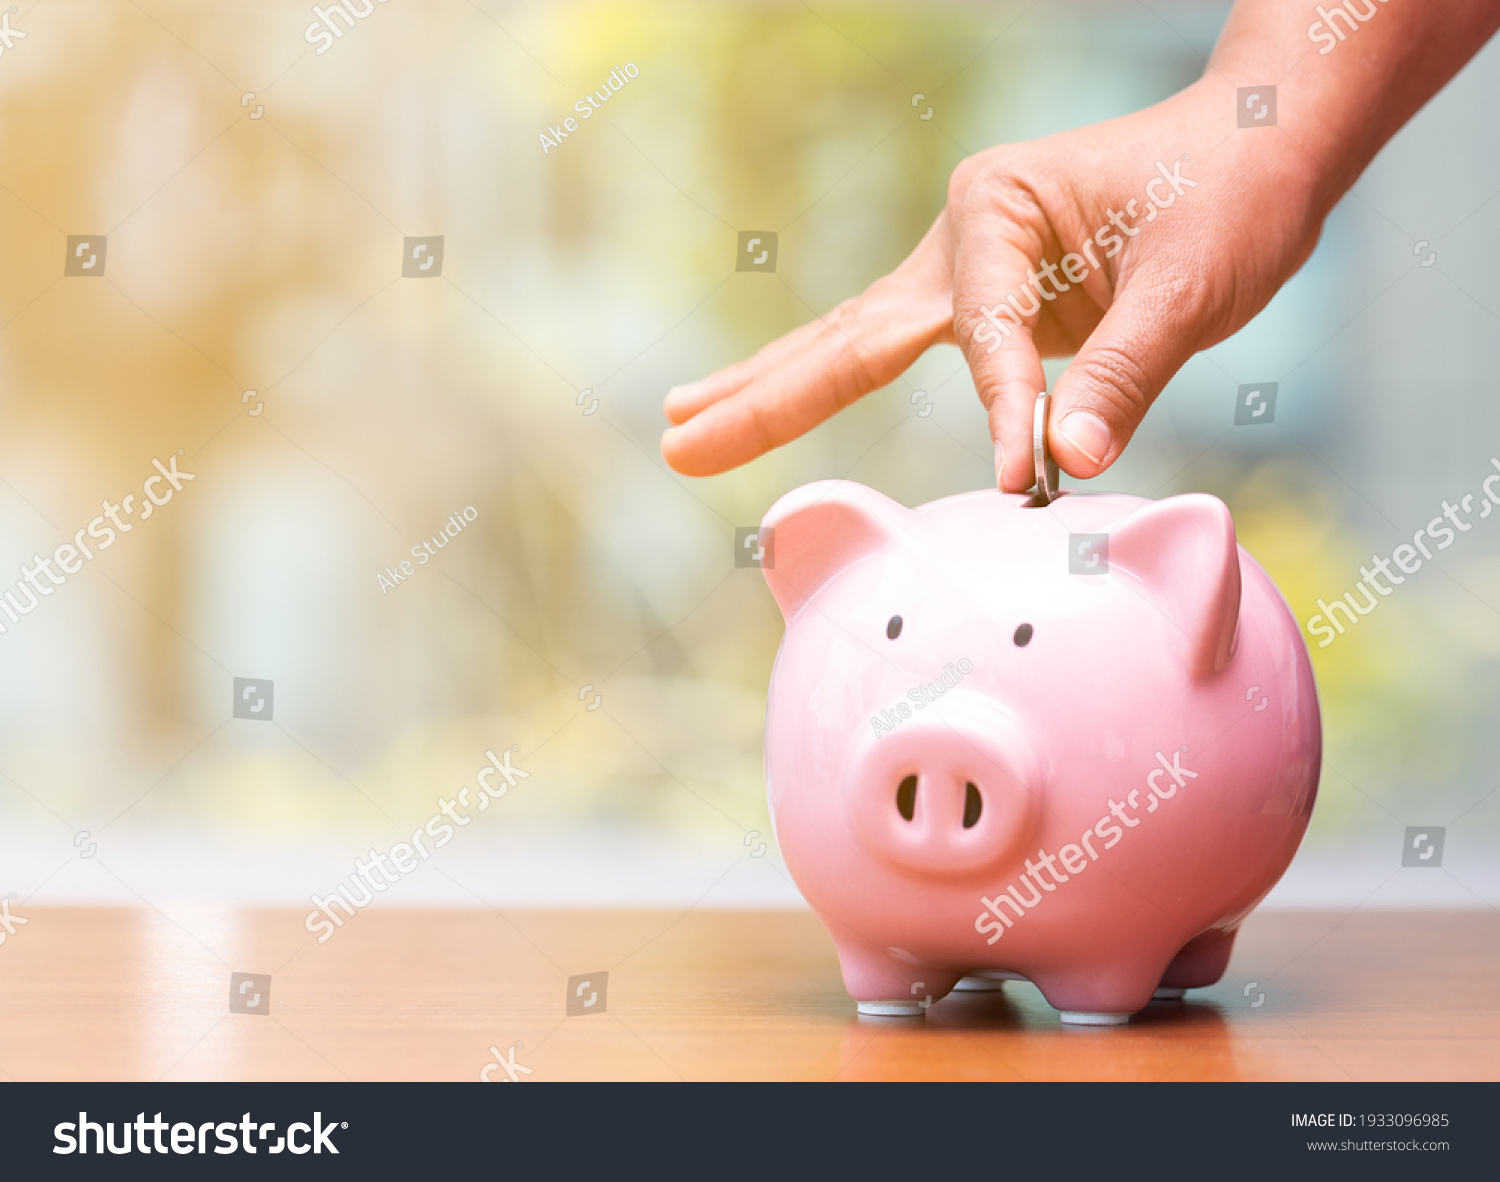 Concept hand putting money coin into piggy bank saving money for future plan and retirement fund, Business or finance saving show putting coin saving and investment money  retro vintage color tone. #1933096985